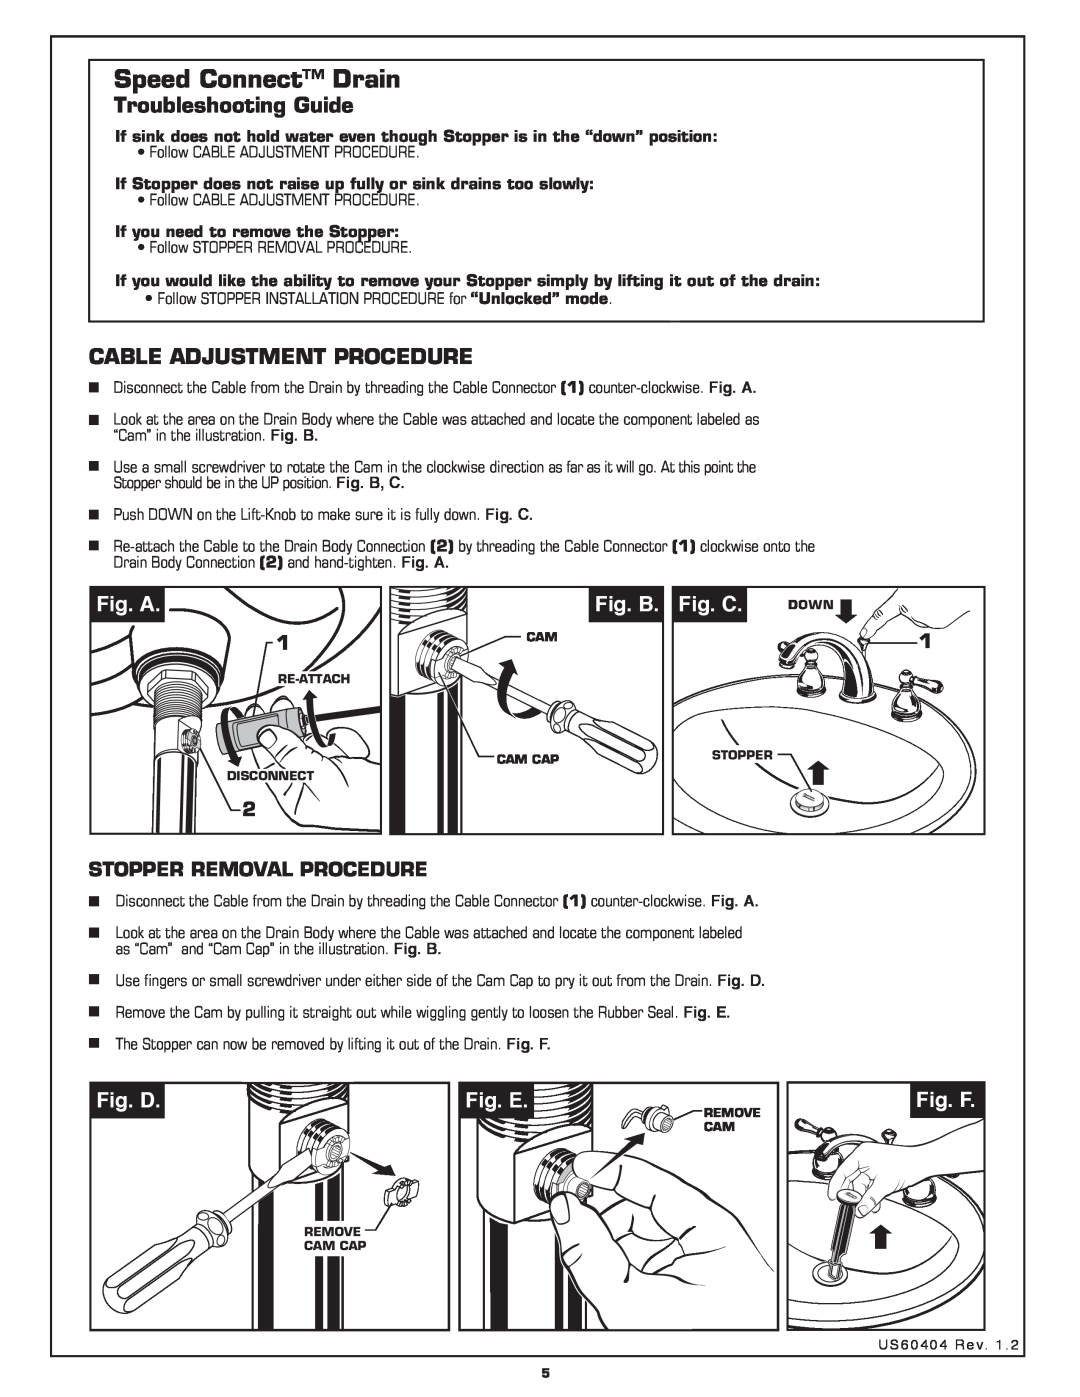 American Standard 7871.712 Troubleshooting Guide, Cable Adjustment Procedure, Fig. A, Fig. B, Fig. C, Fig. D, Fig. E 